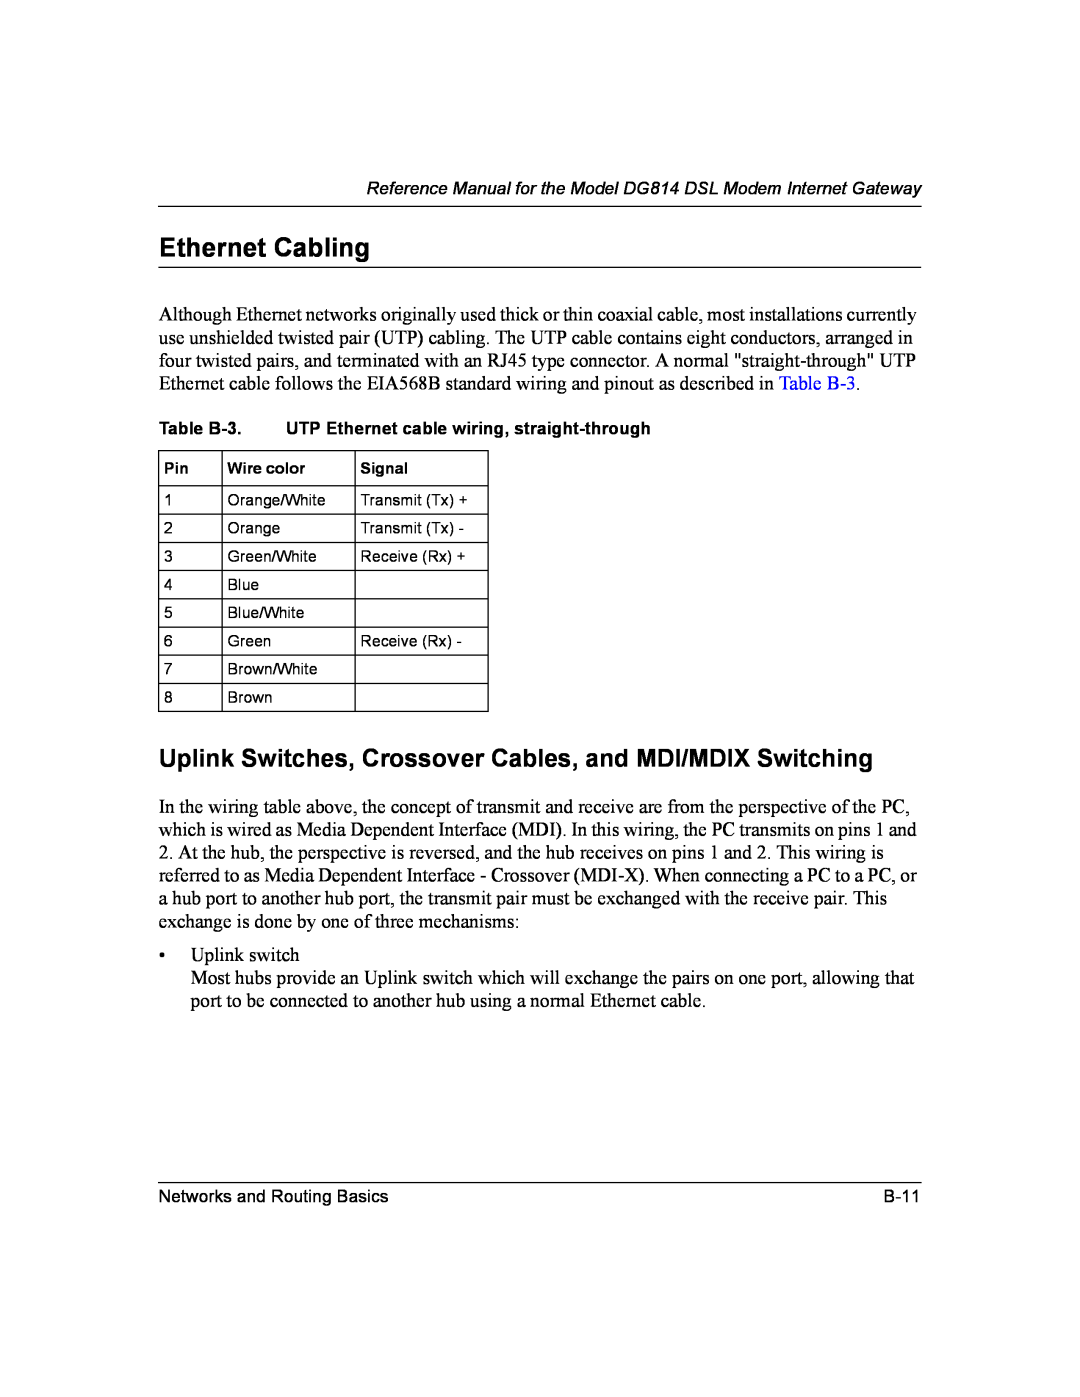 NETGEAR DG814 DSL manual Ethernet Cabling, Uplink Switches, Crossover Cables, and MDI/MDIX Switching 